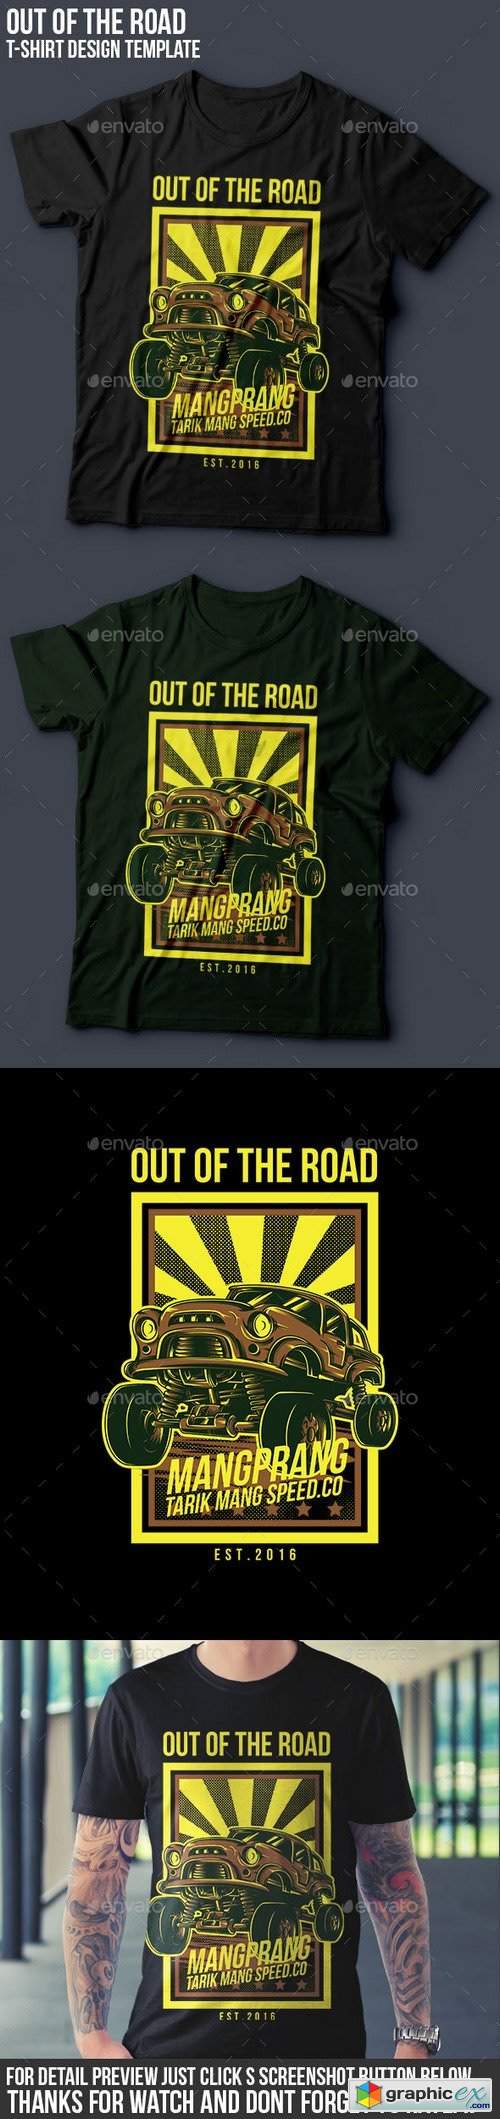 Out of the Road T-Shirt Design